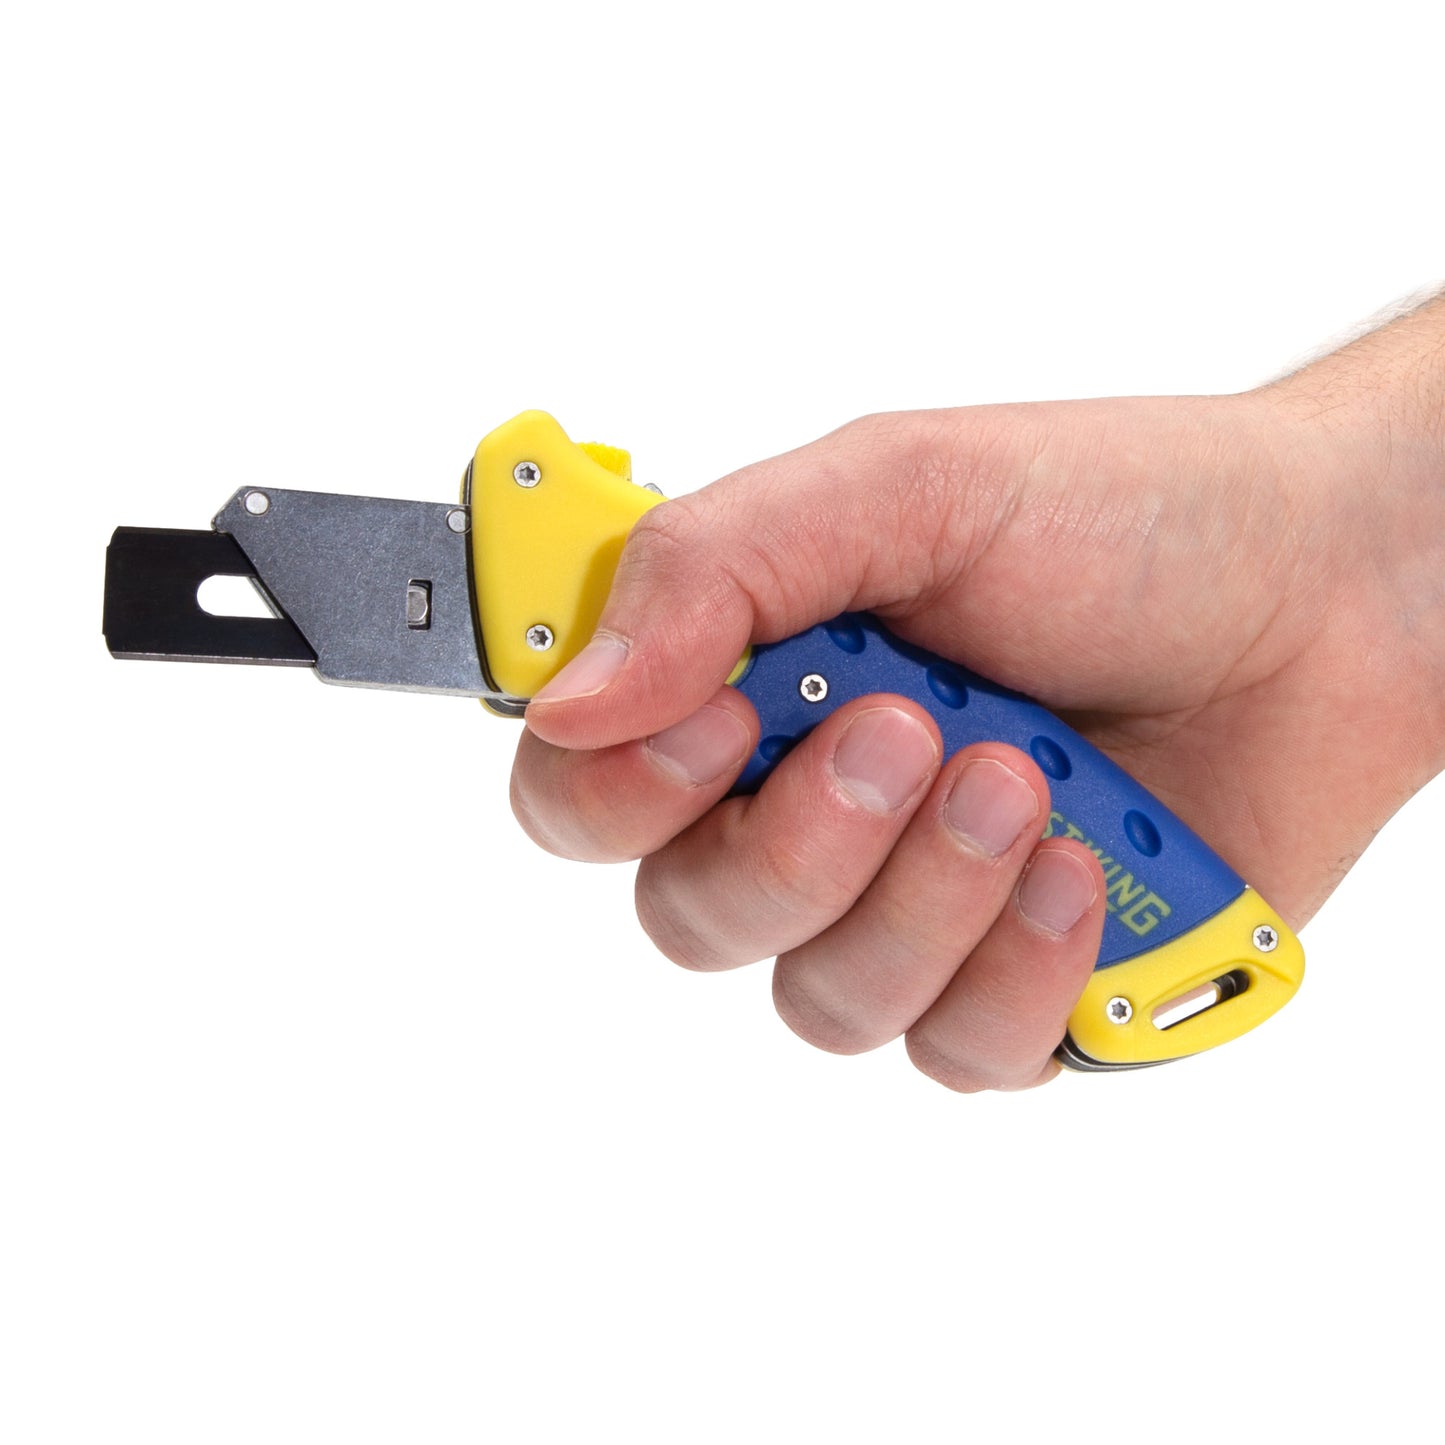 3-In-1 Angle Adjusting Retractable Carpet / Flooring and Utility Knife